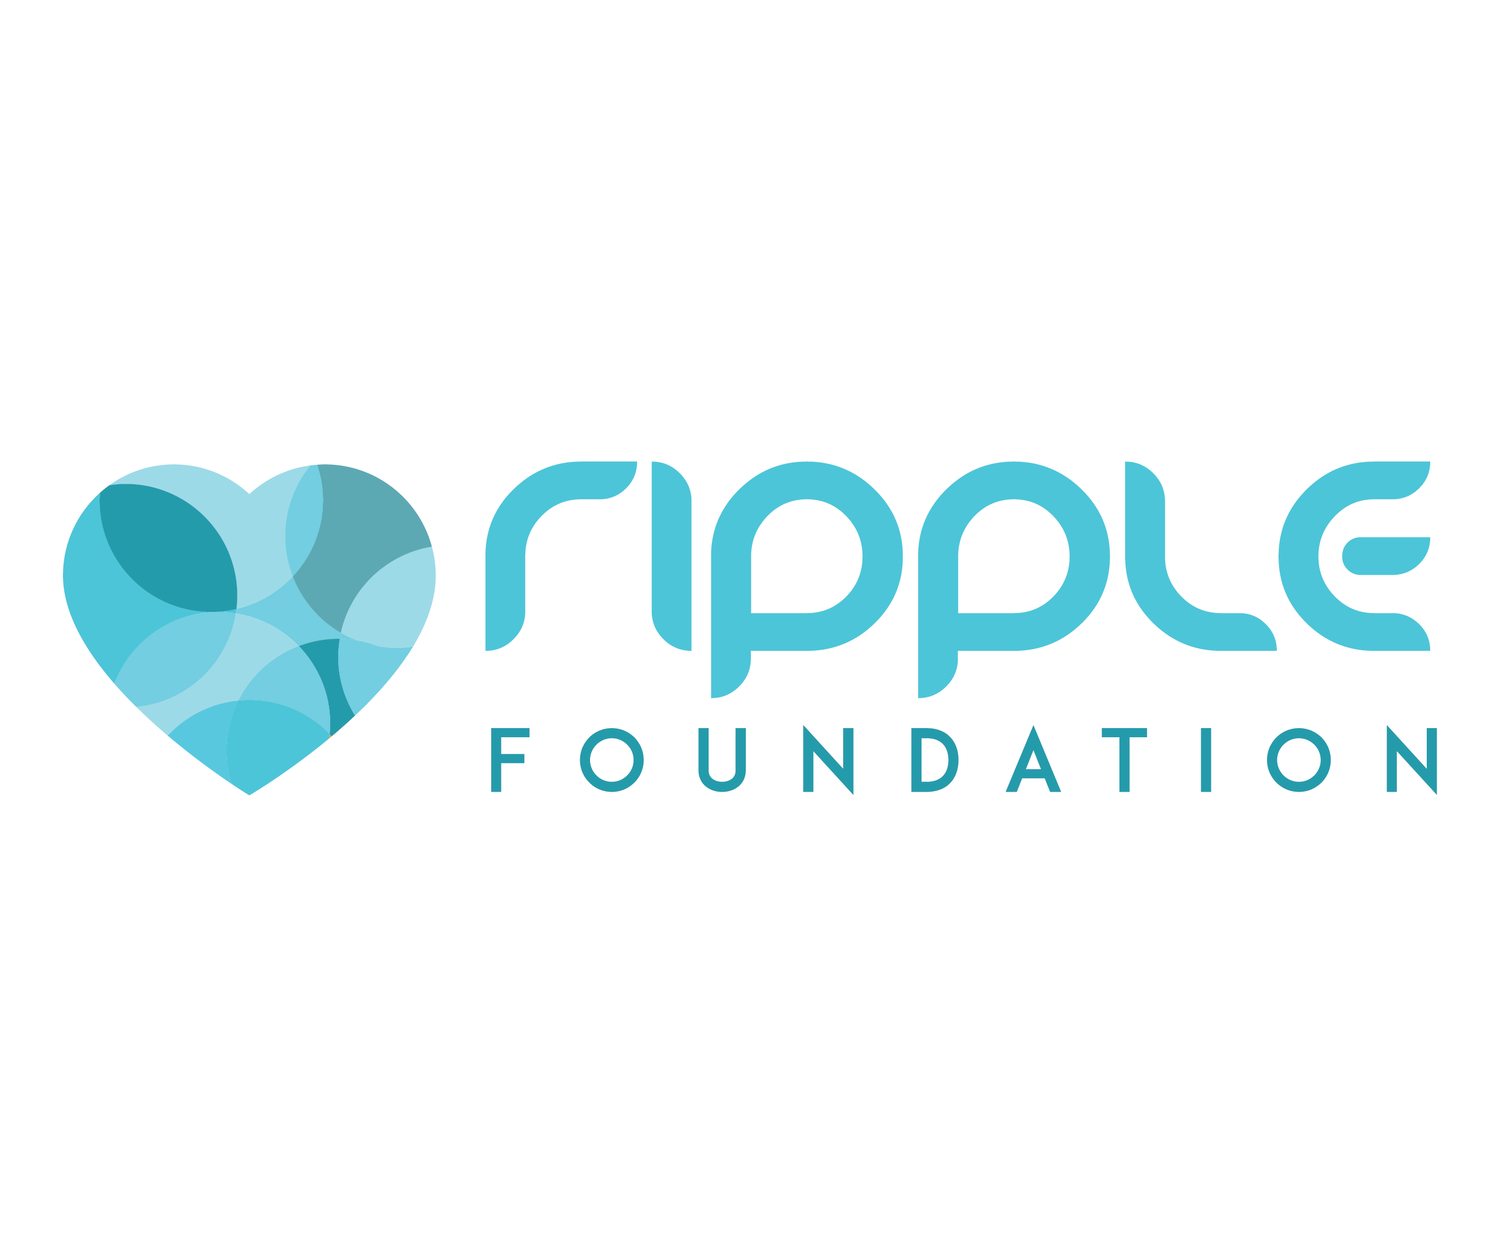 OUR MISSION — The Ripple Foundation